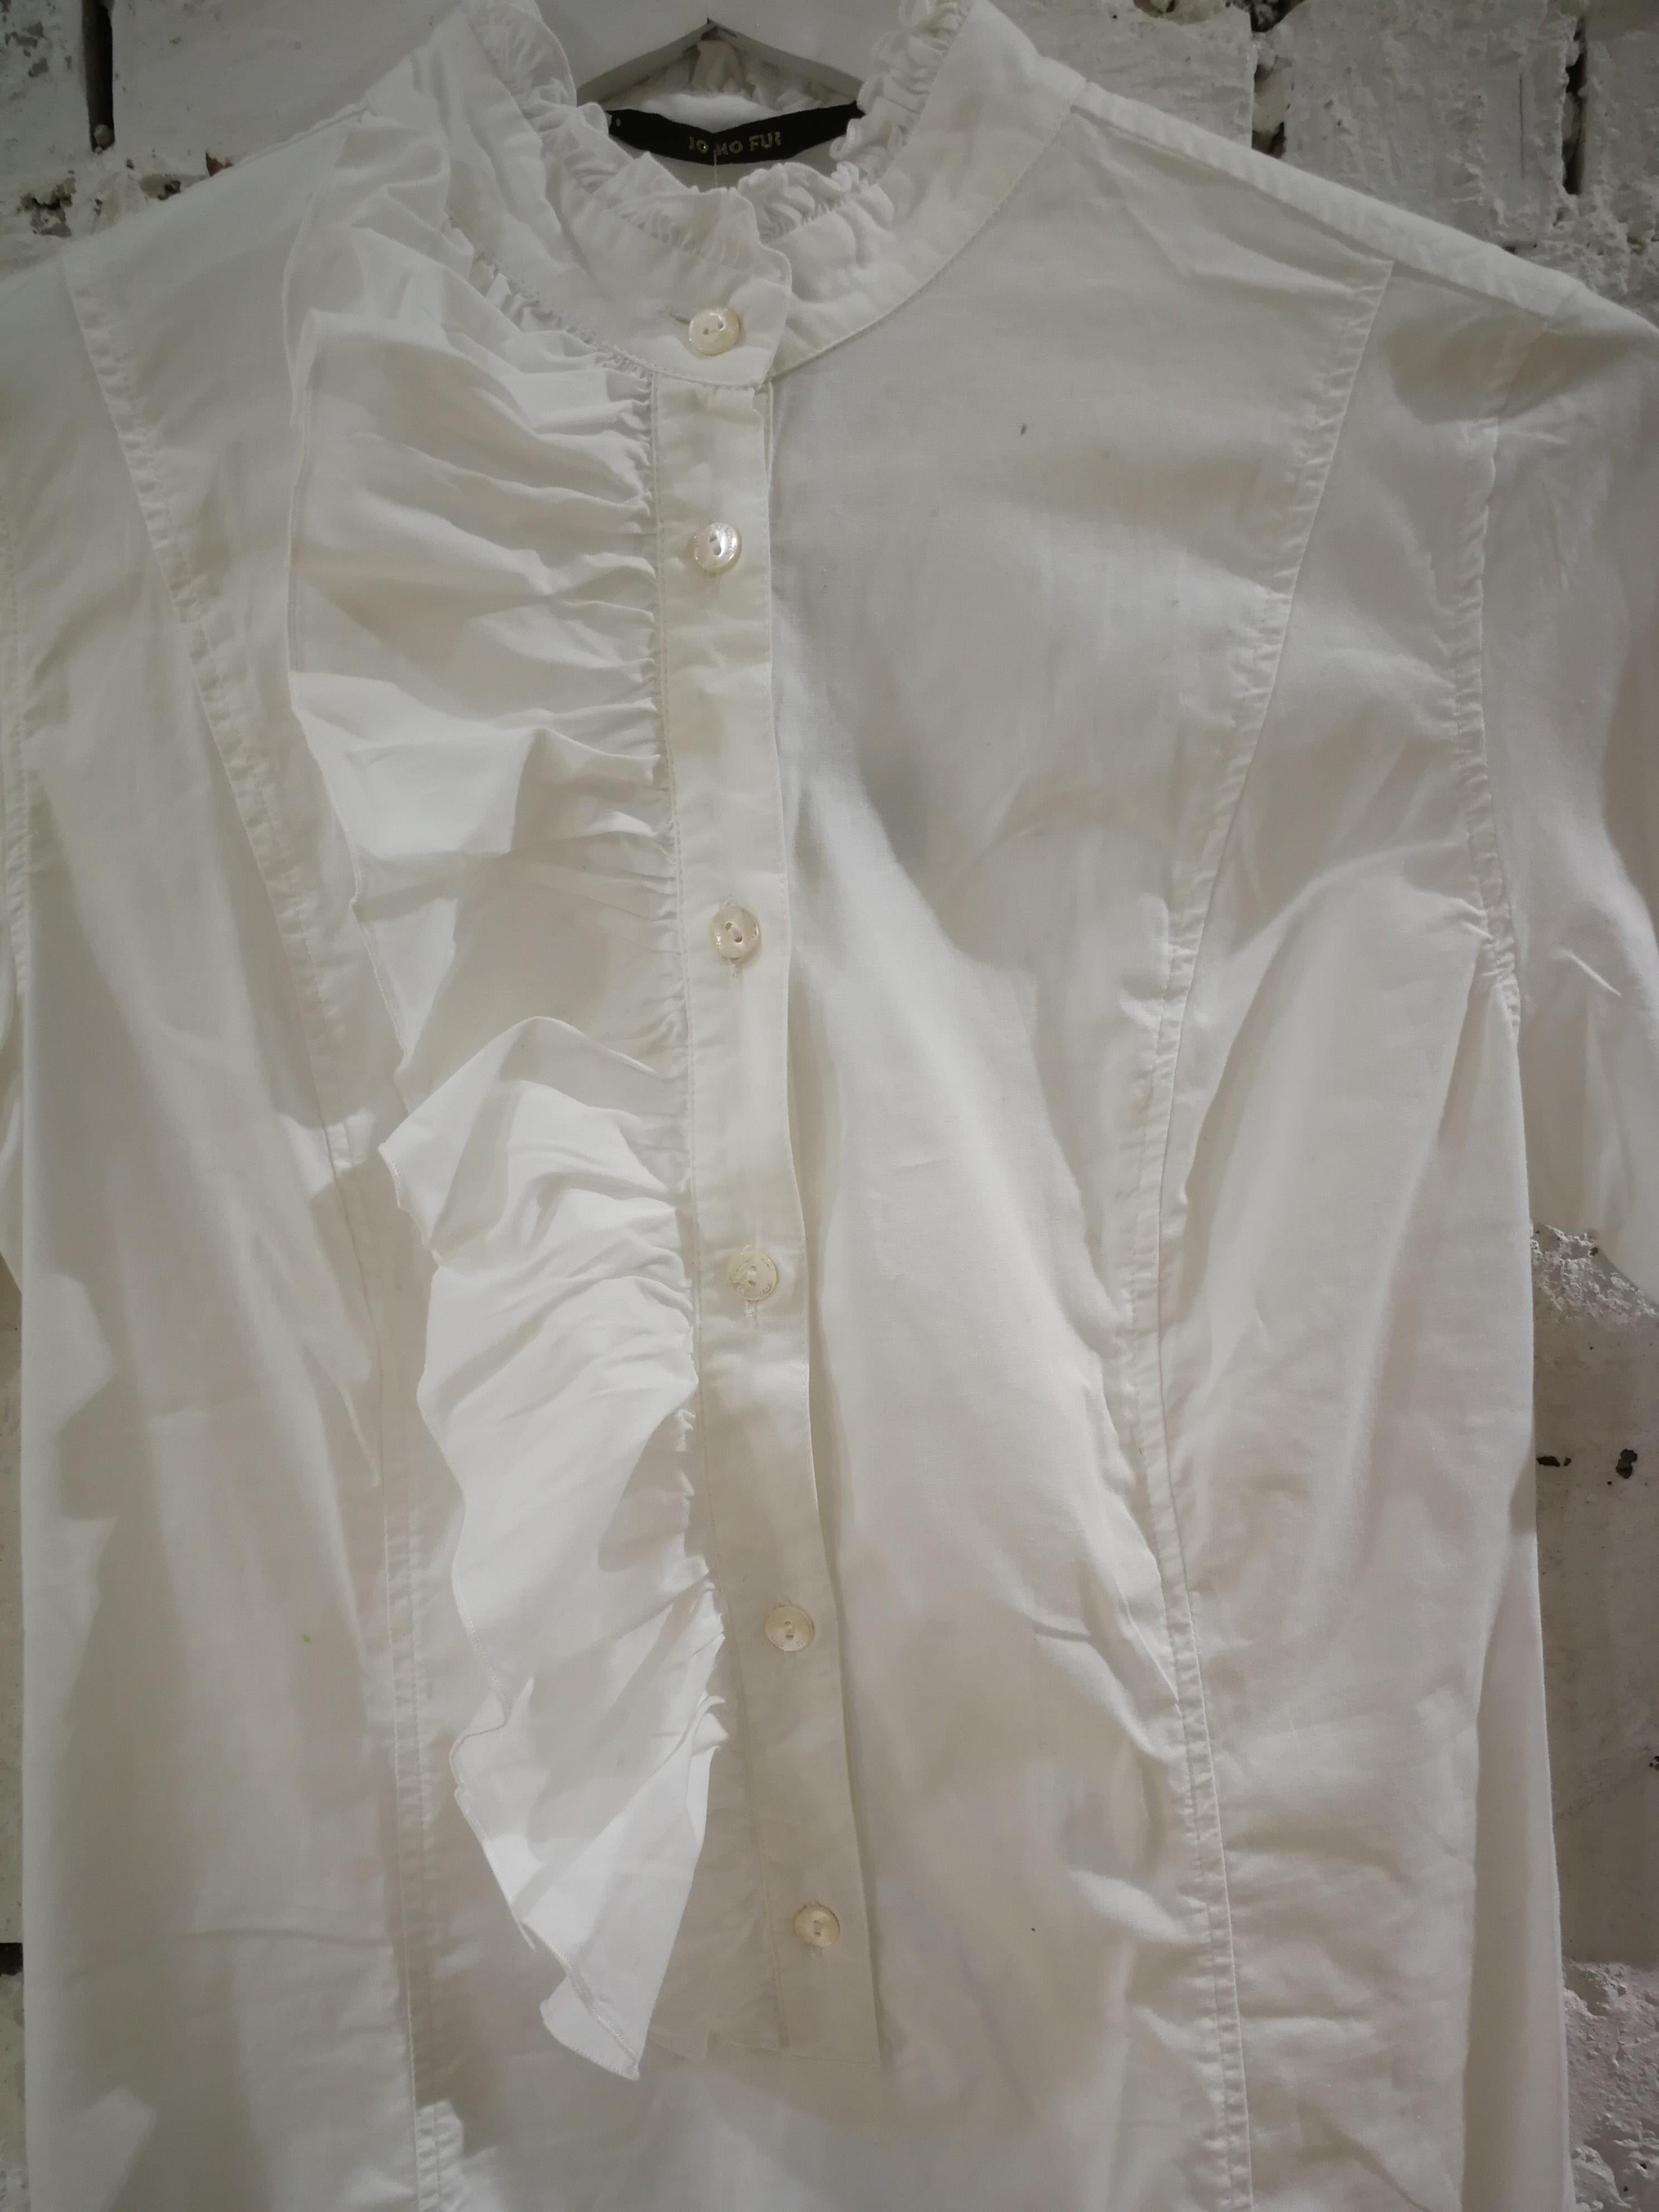 Jo No Fui White Shirt
Totally made in italy in size 42
composition: Cotton